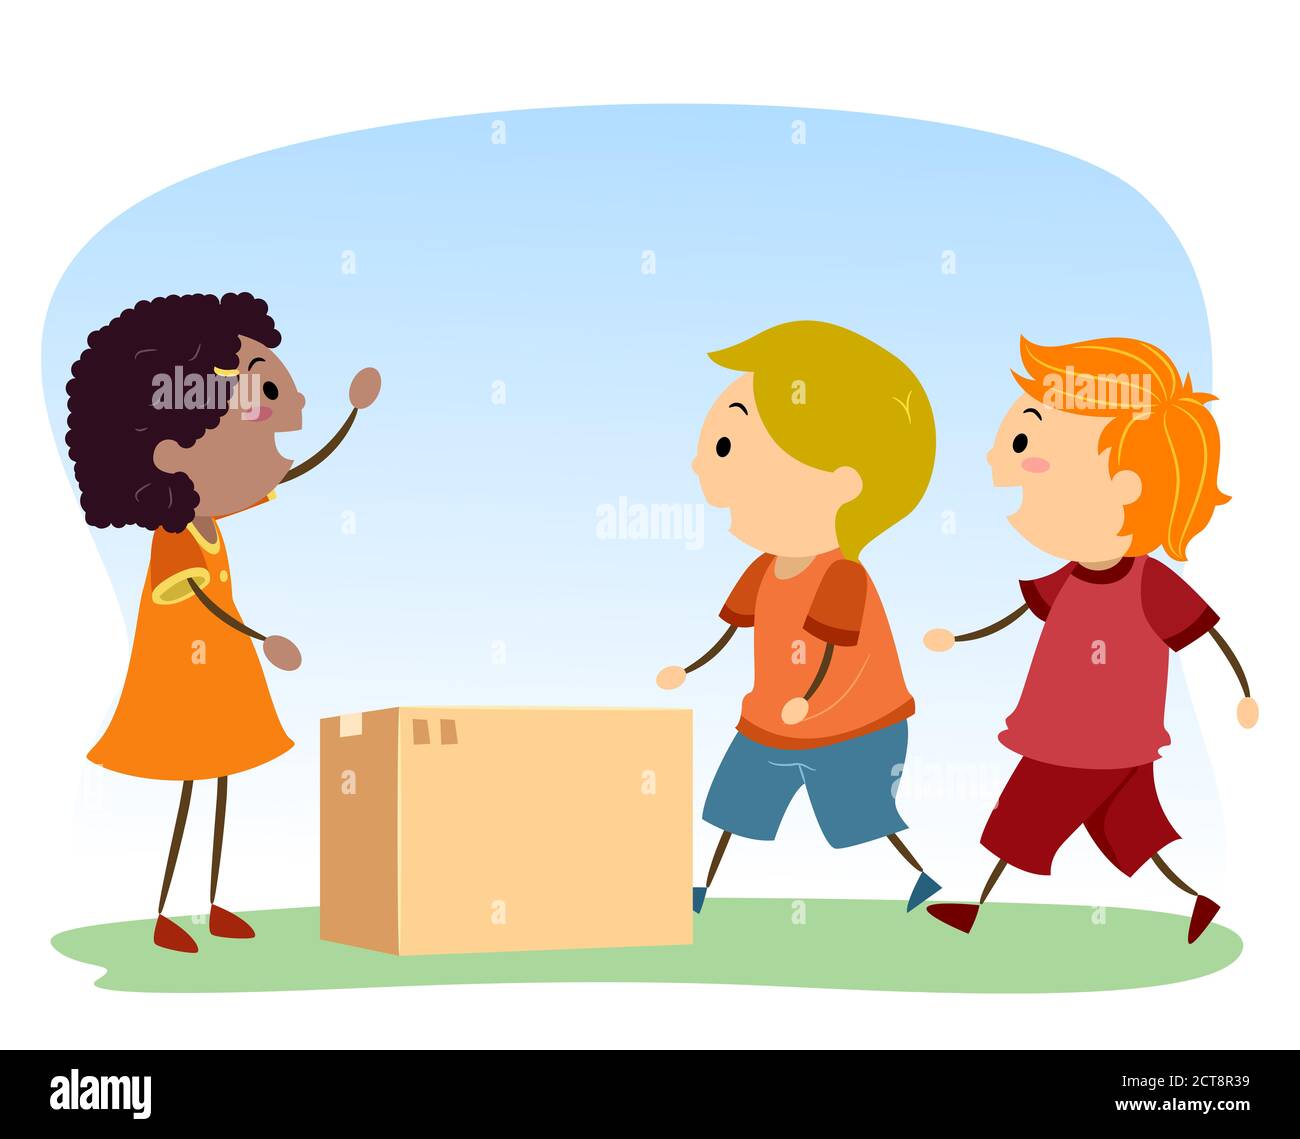 Illustration Of Stickman Kids Helping Another Kid Asking For Help Moving The Box Stock Photo Alamy